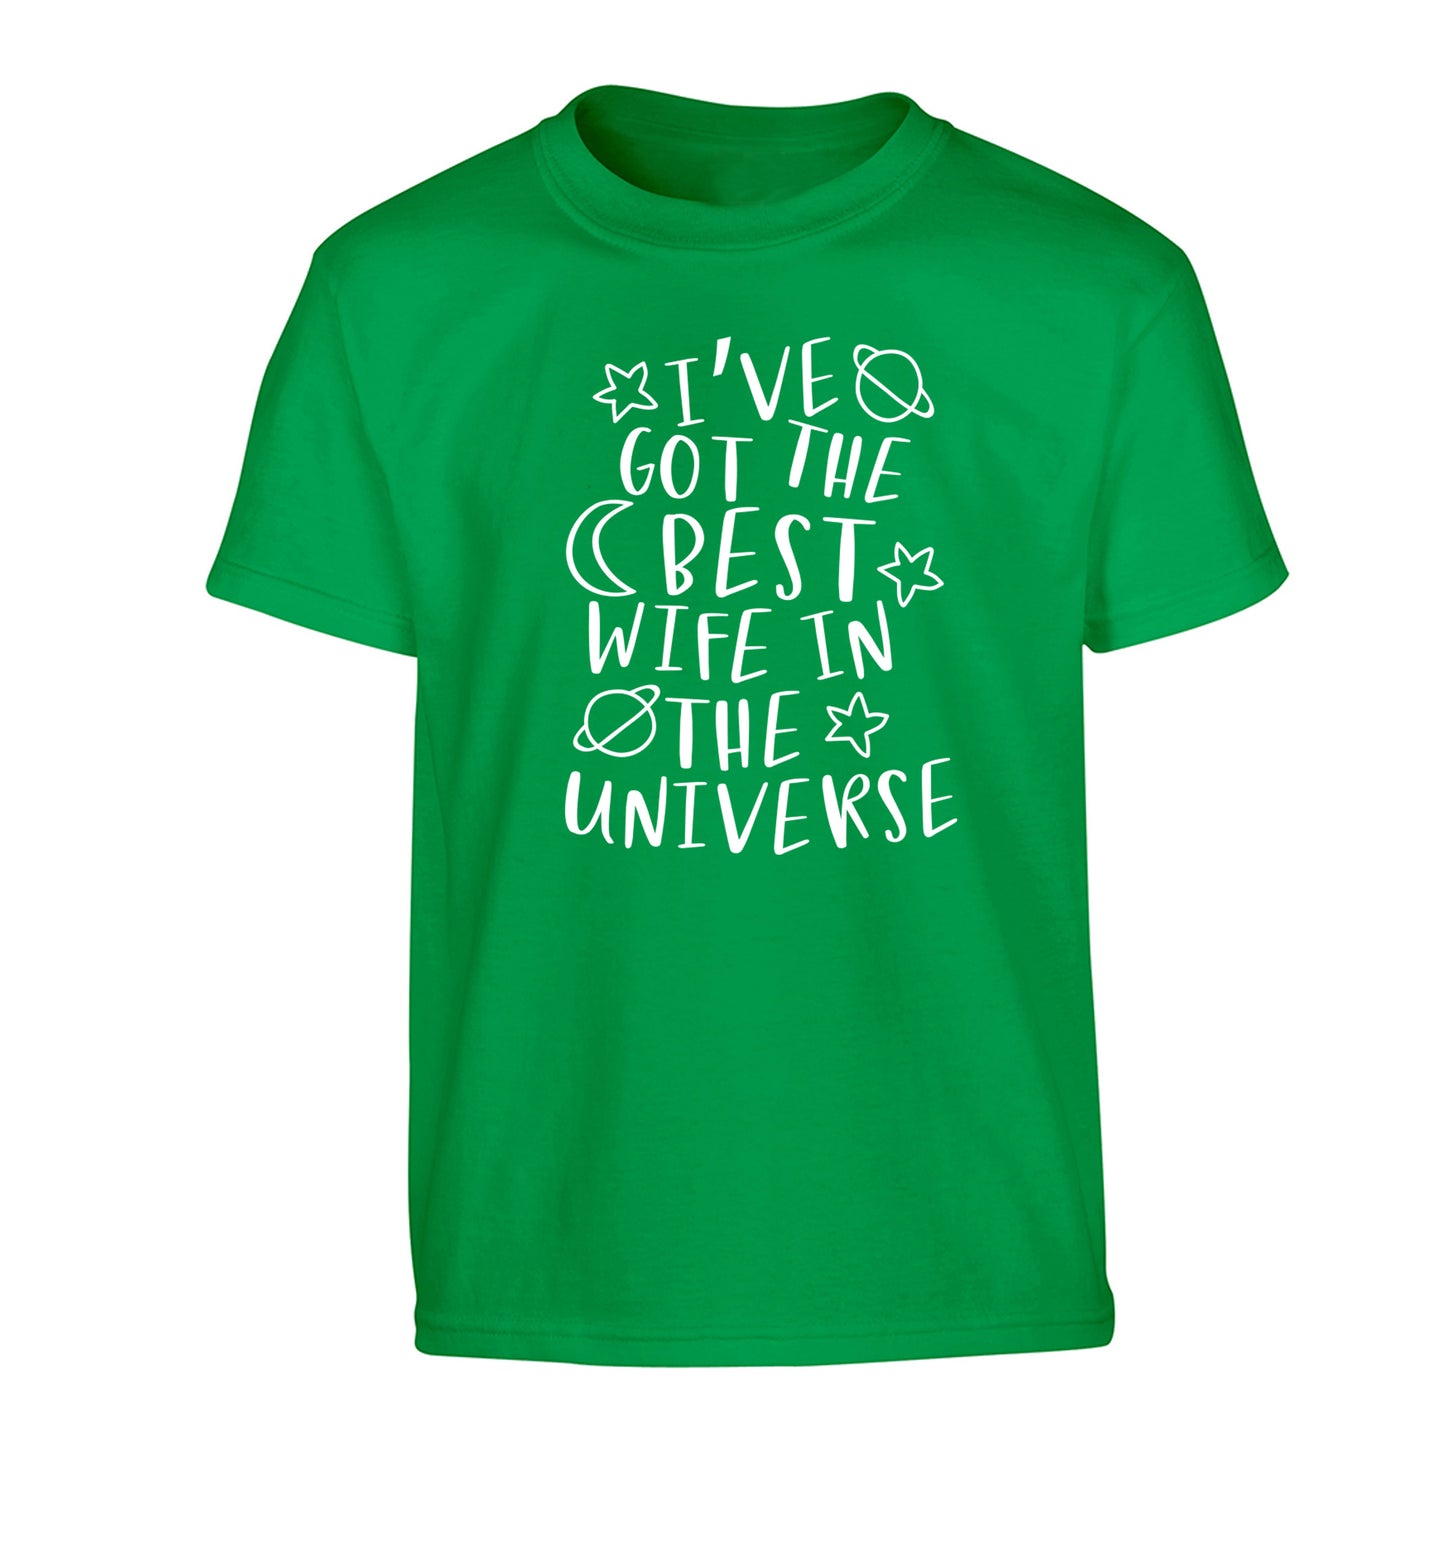 I've got the best wife in the universe Children's green Tshirt 12-13 Years